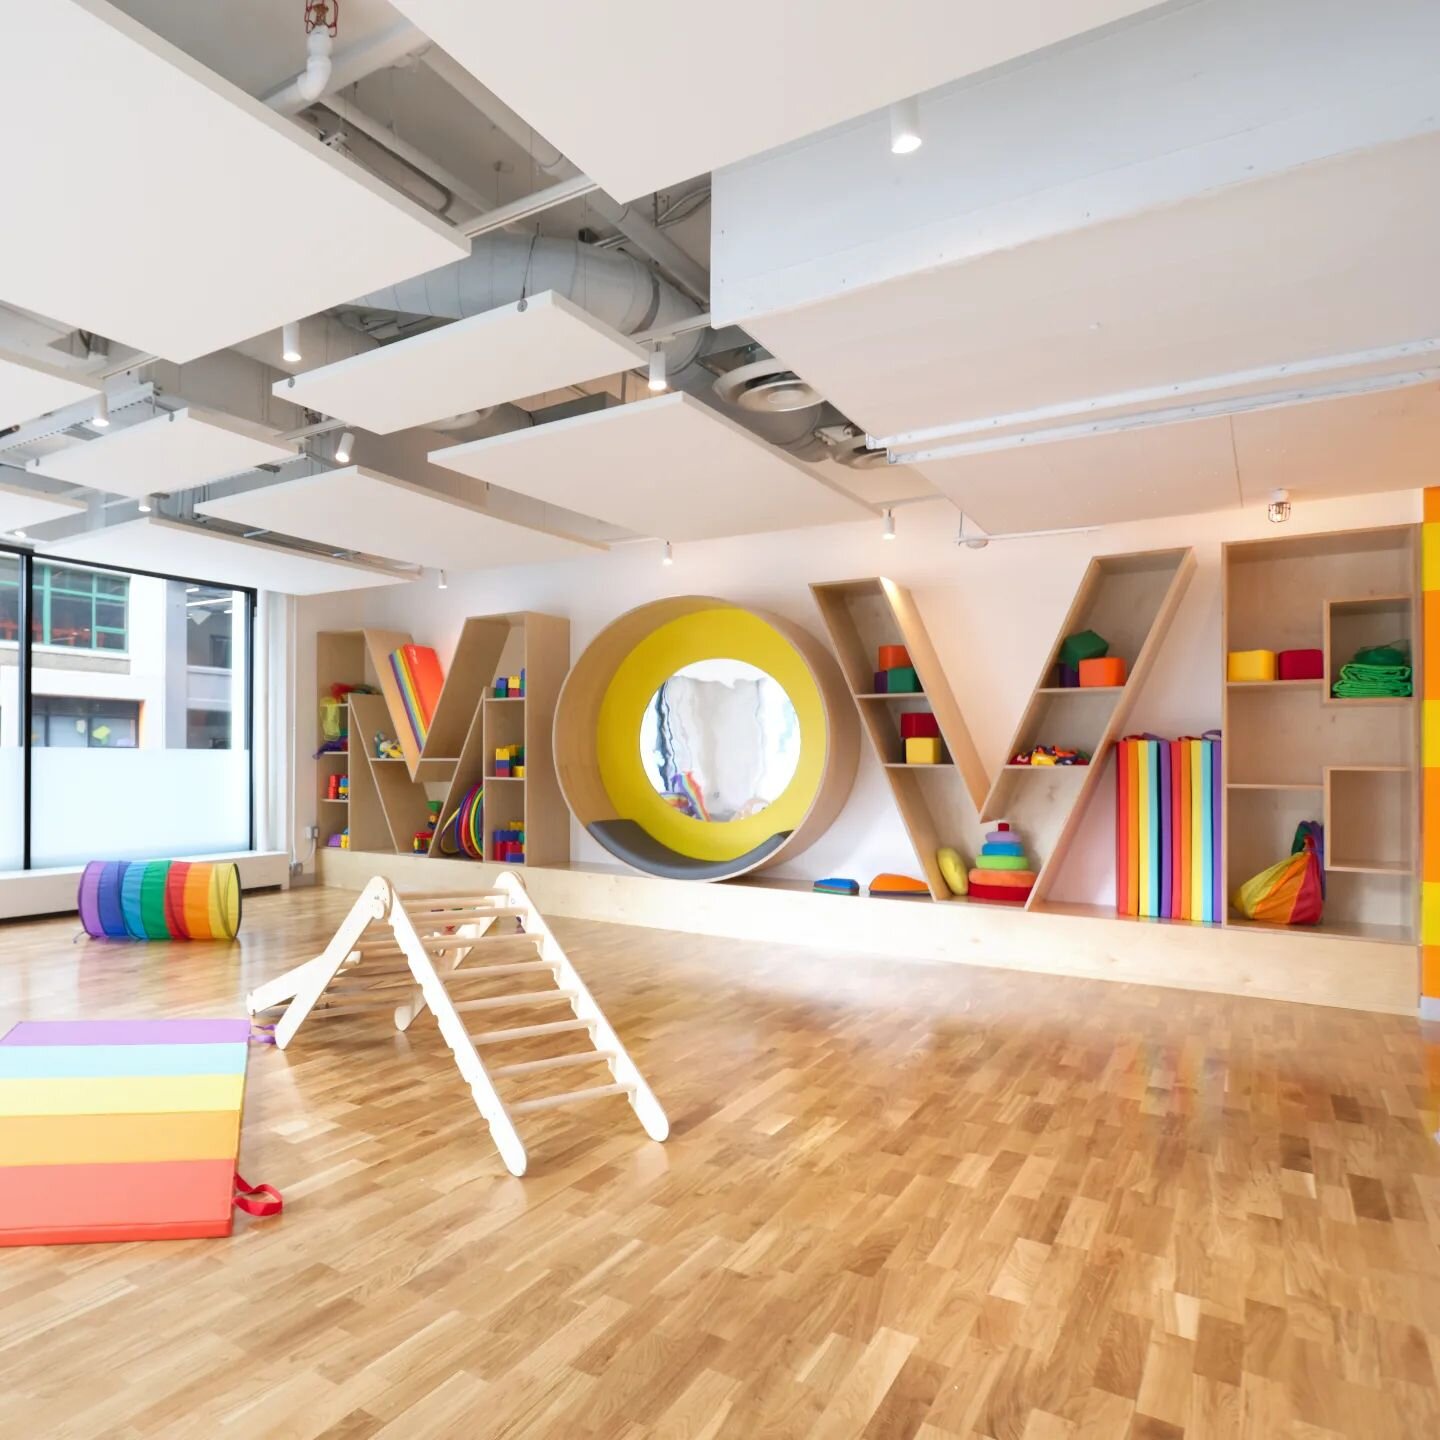 Special Spaces at School. We located this &ldquo;Wiggle Room&rdquo; at Vivvi Dumbo on the corner with windows to the street on two sides. Students and pedestrians are enticed to MOVE by the messaging in the millwork and the engaging bright colors!
.
